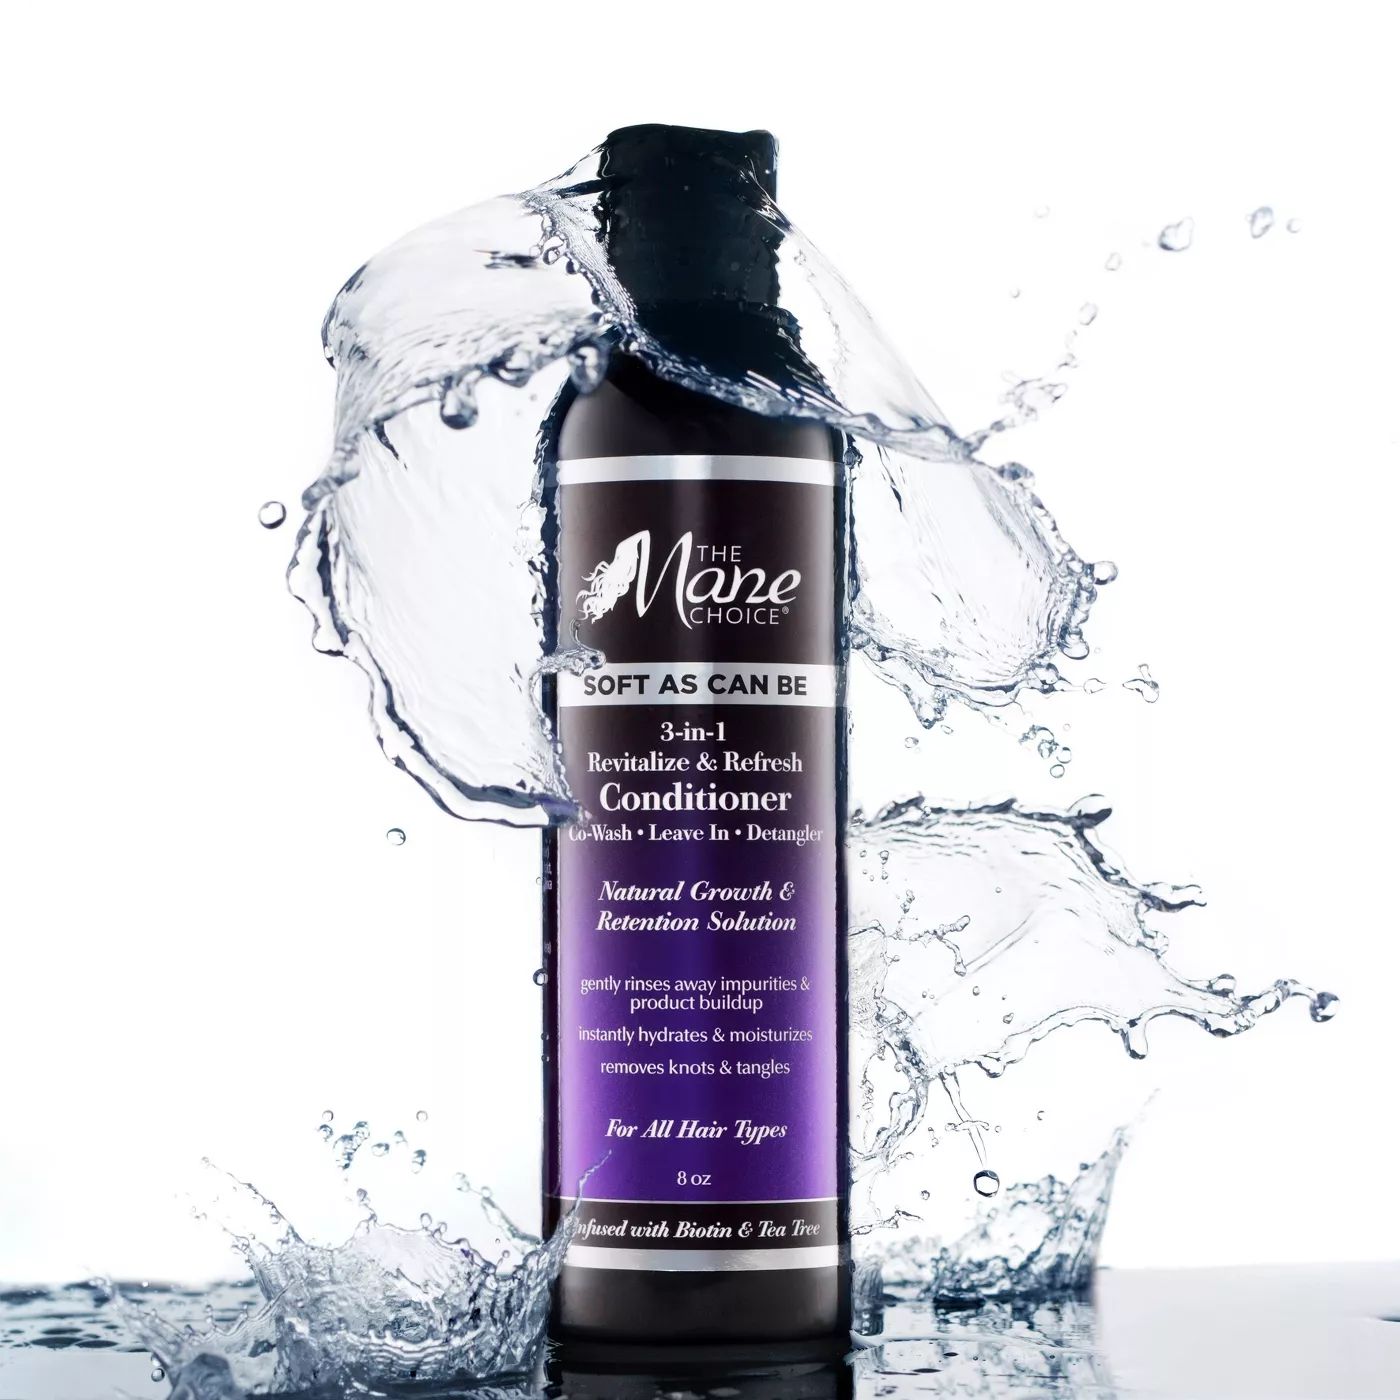 The Mane Choice 3-In-1 Revitalize & Refresh Conditioner - 8oz - image 5 of 5